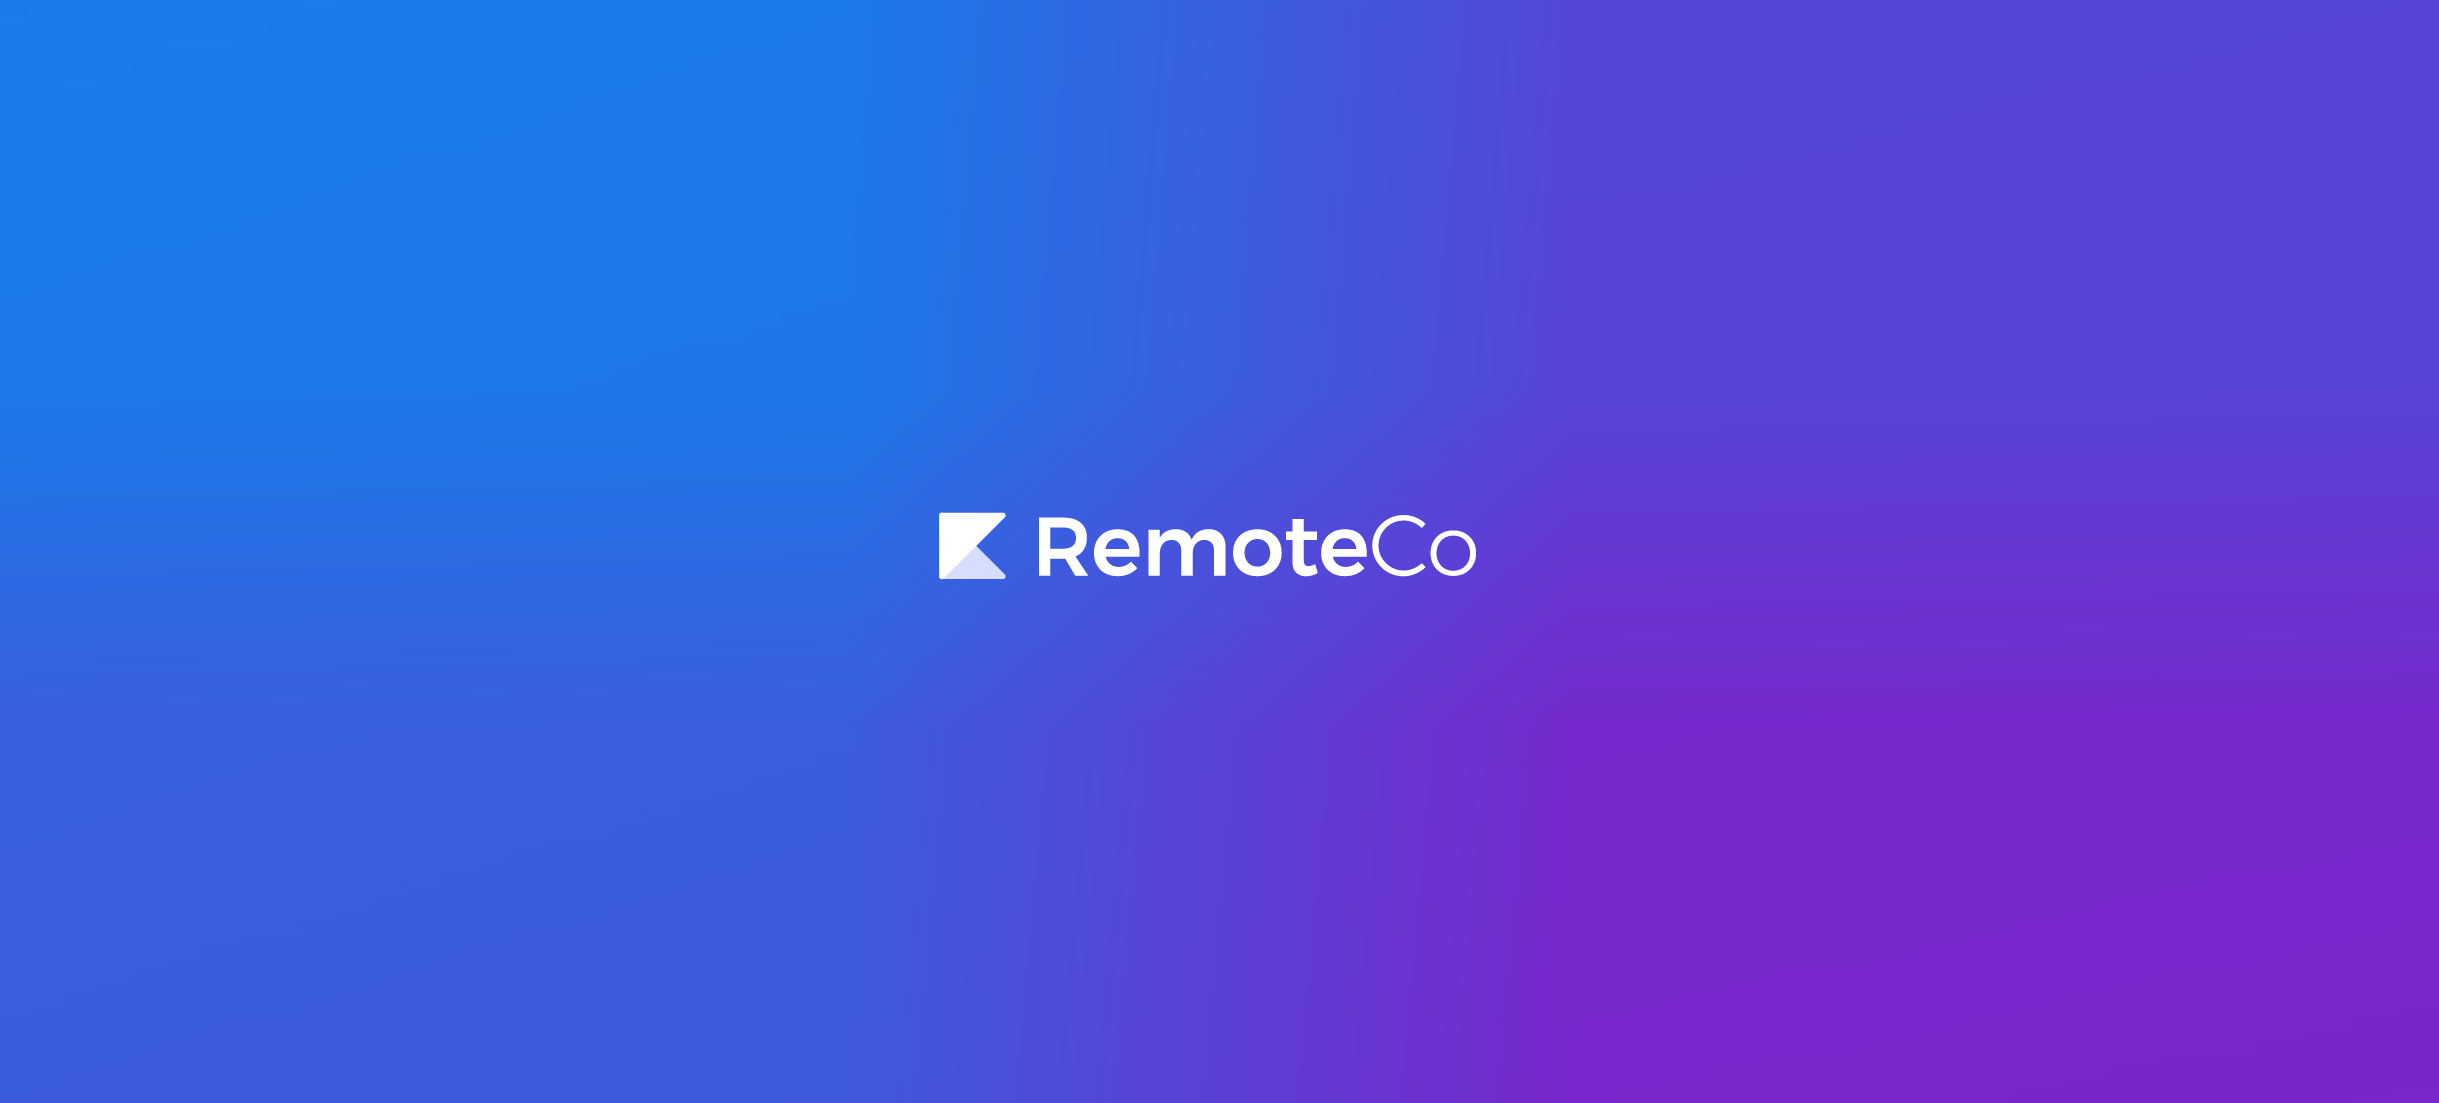 Find pricing, reviews and other details about RemoteCo